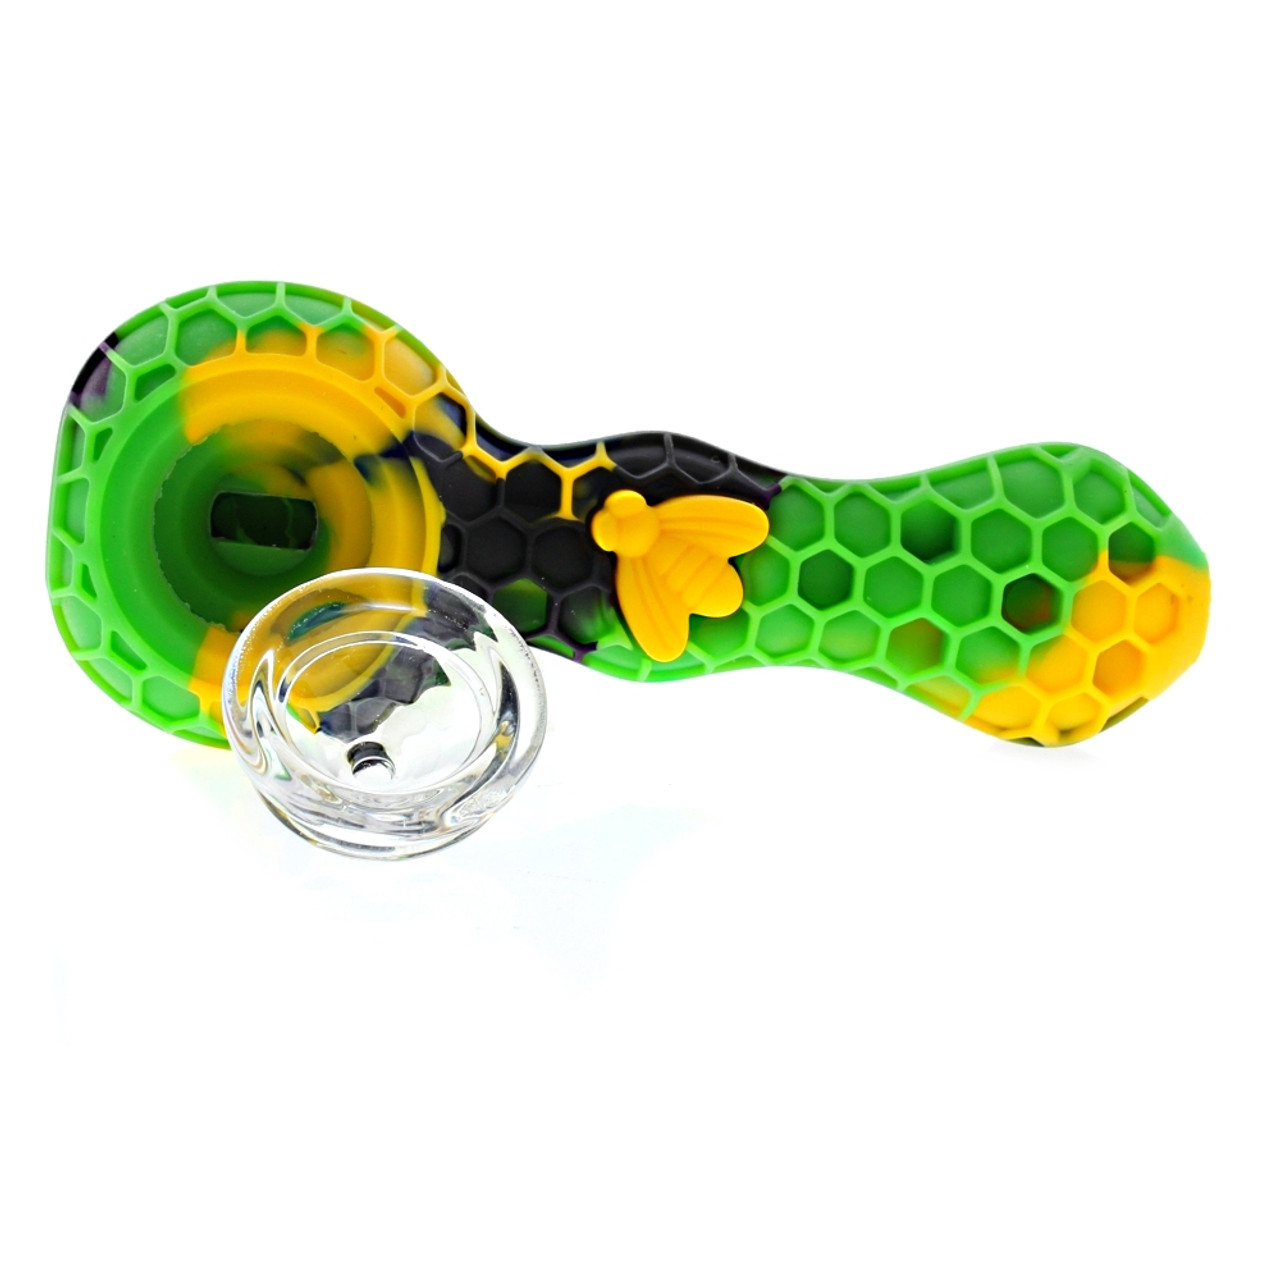 https://cdn11.bigcommerce.com/s-1n8r405nxd/images/stencil/1280x1280/products/11150/23827/85761-2-Stratus_Silicone_Honey_Comb_Bee_Spoon_Pipe_Bendable_Unbreakable_Glass_Insert_Dry-Cheap_Online_Smokeshop__72845.1675442854.jpg?c=2